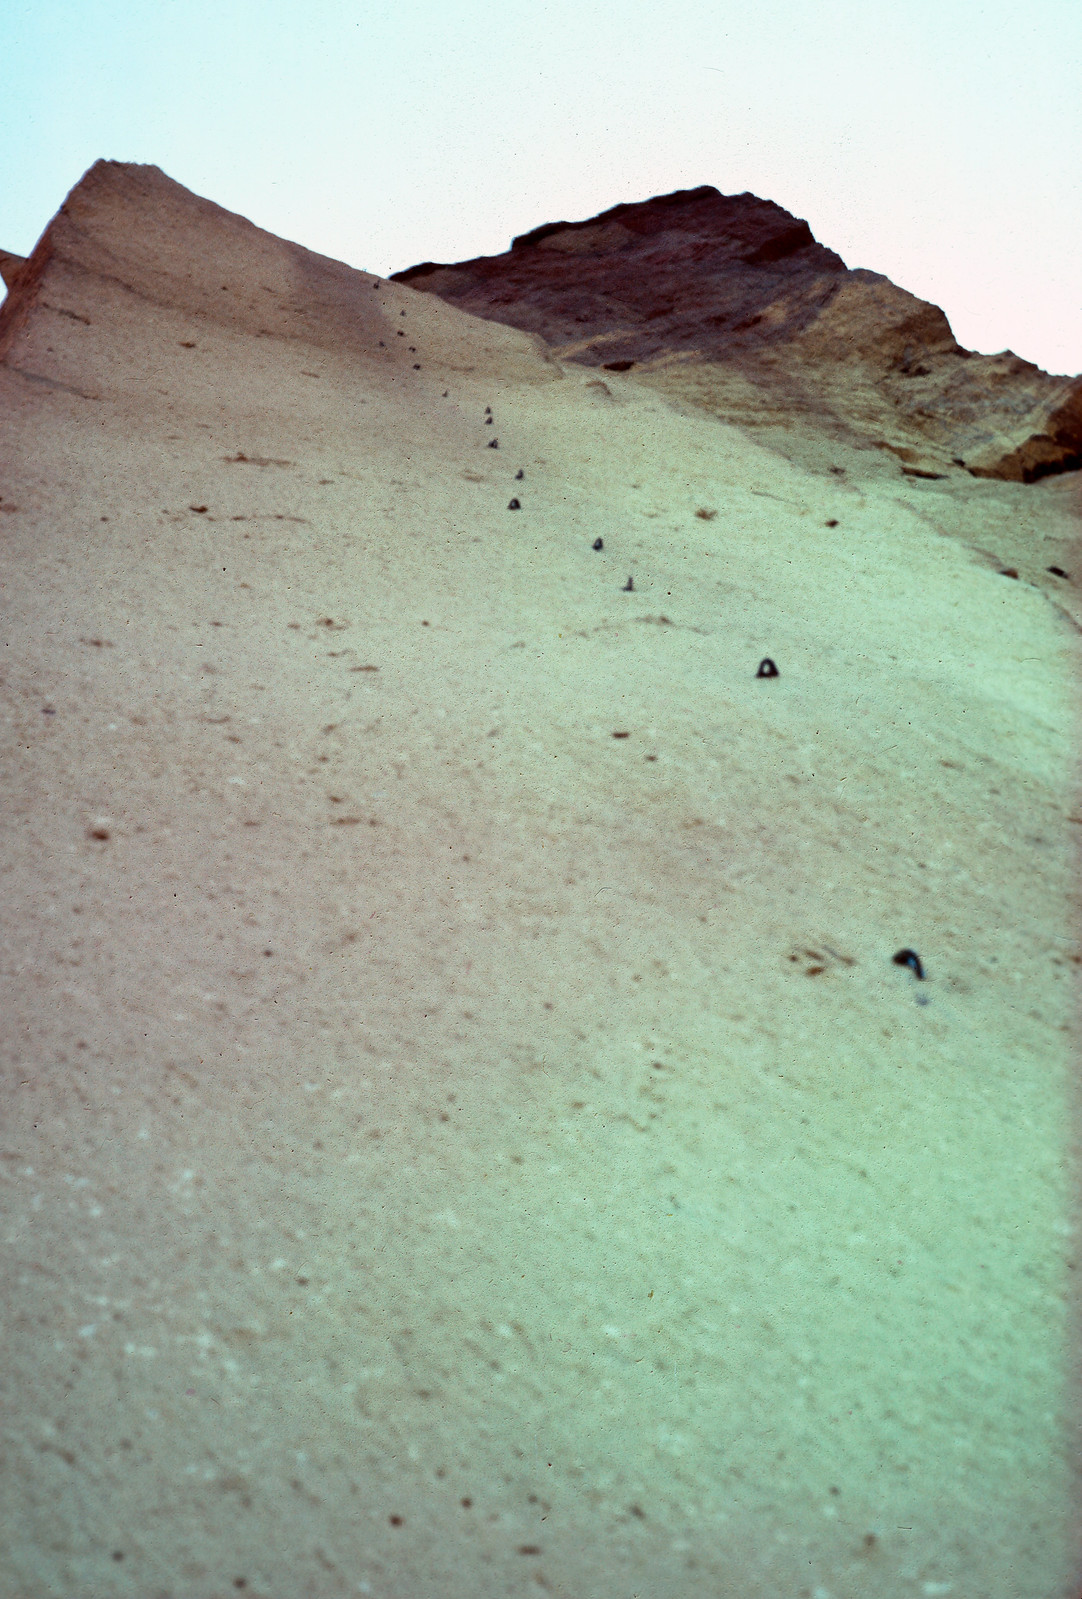 The bolt ladder on pitch 2, west face of Monkey Face